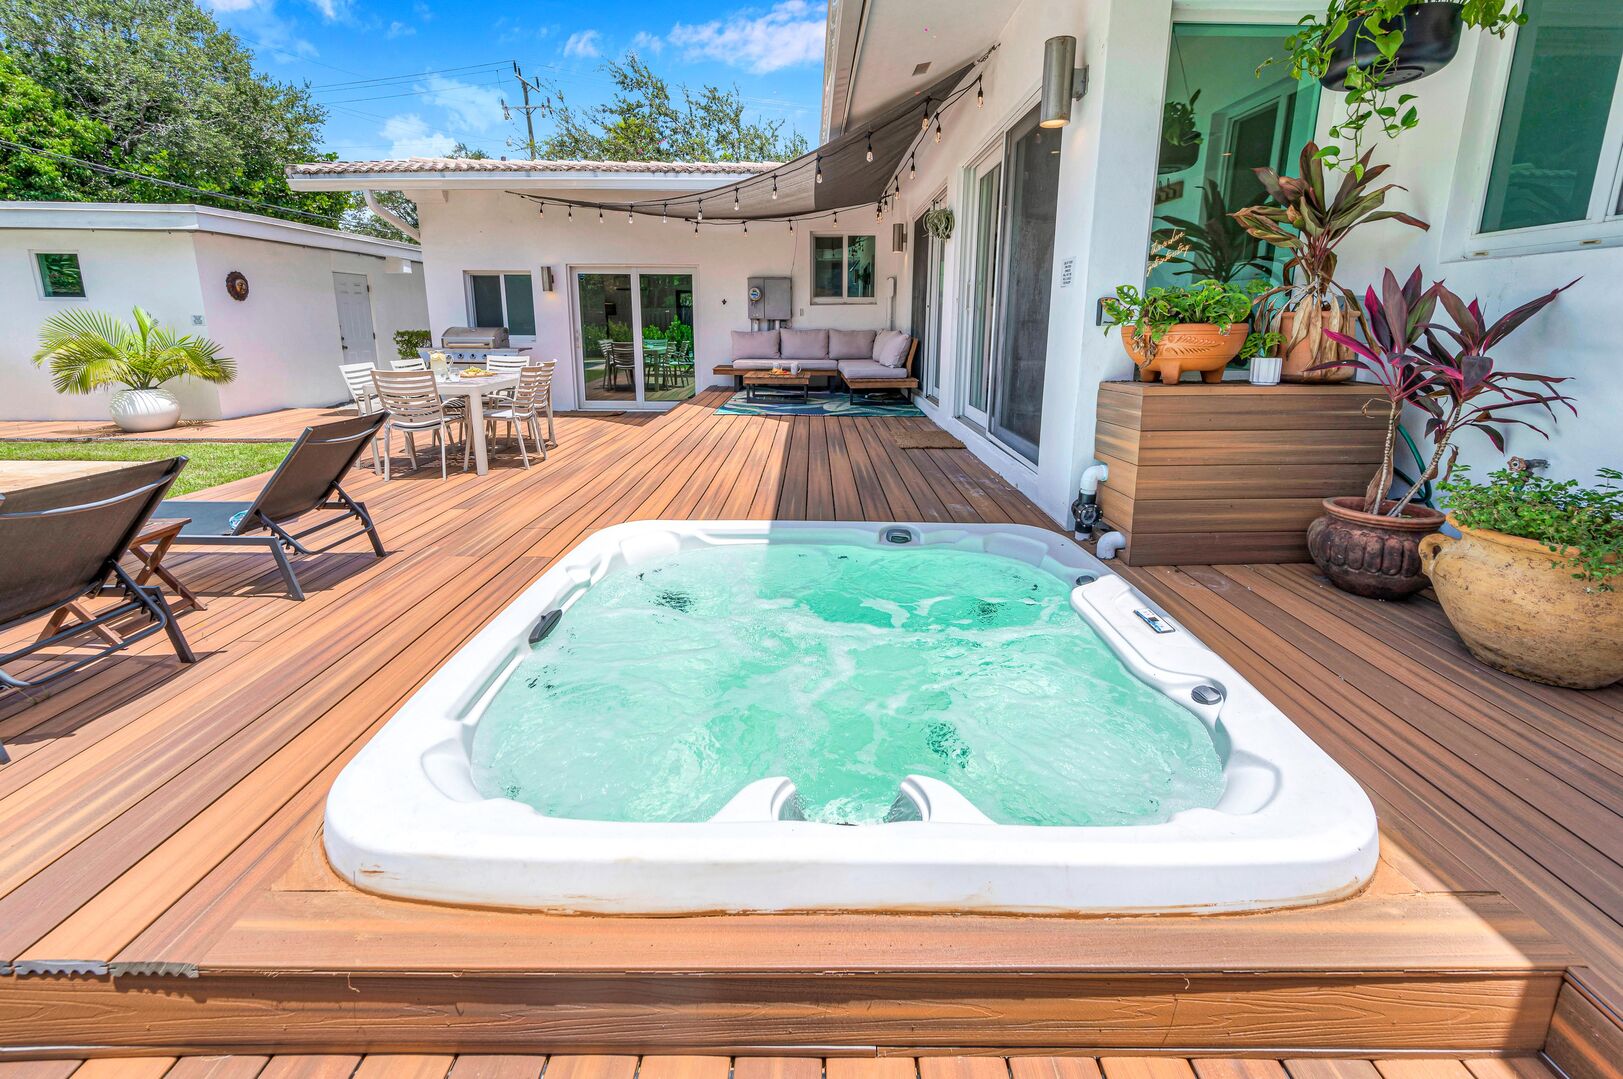 Immerse Yourself in Bliss with Our Inviting Hot Tub. A Sanctuary of Relaxation Awaits.